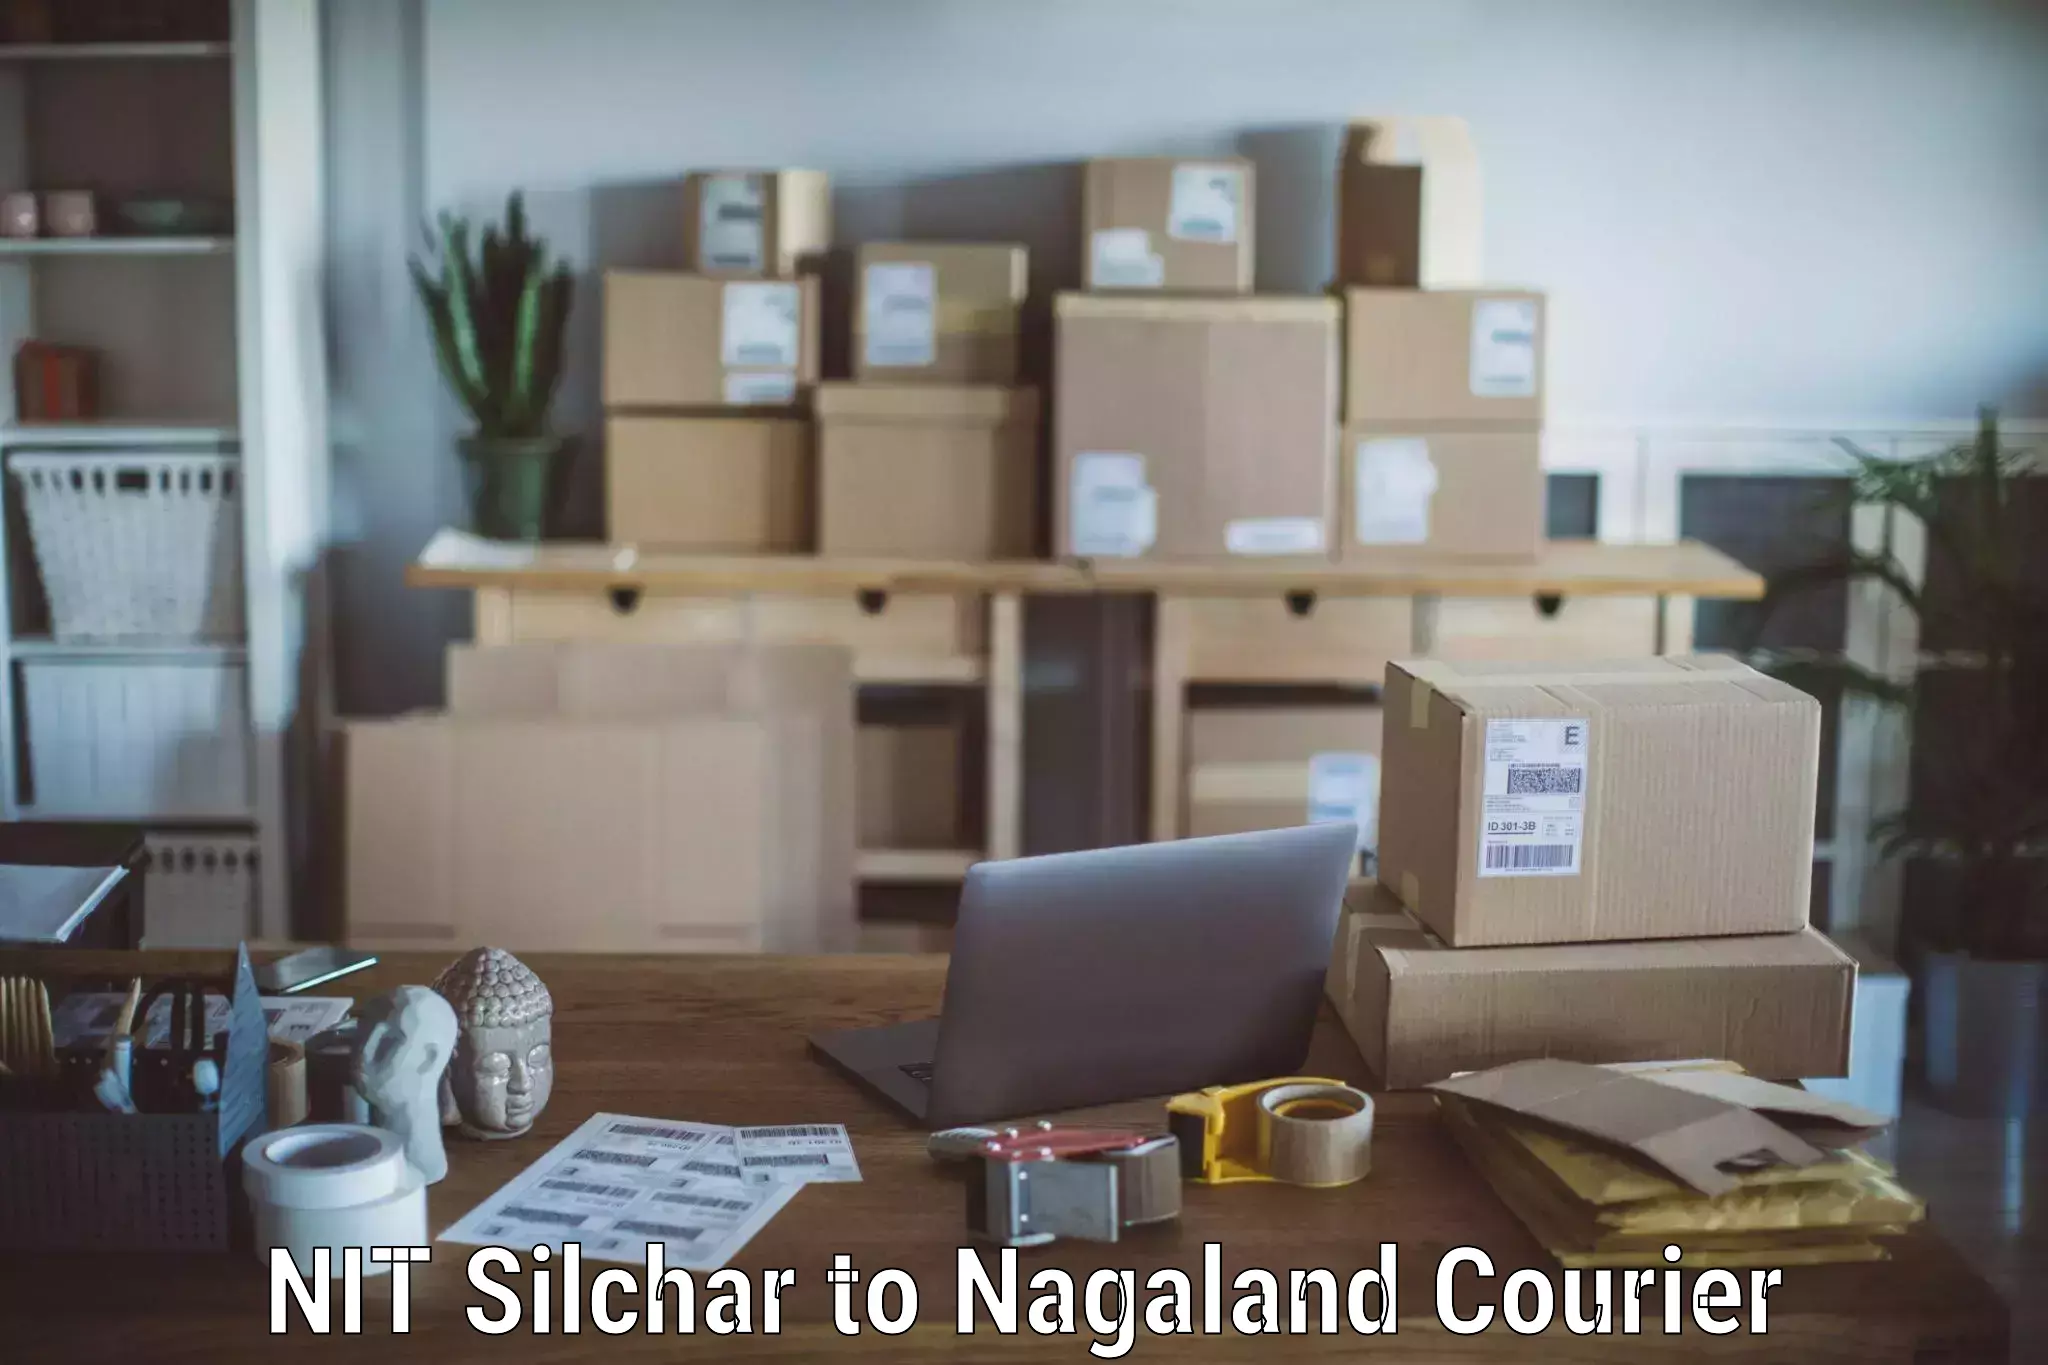 Moving and storage services NIT Silchar to Dimapur